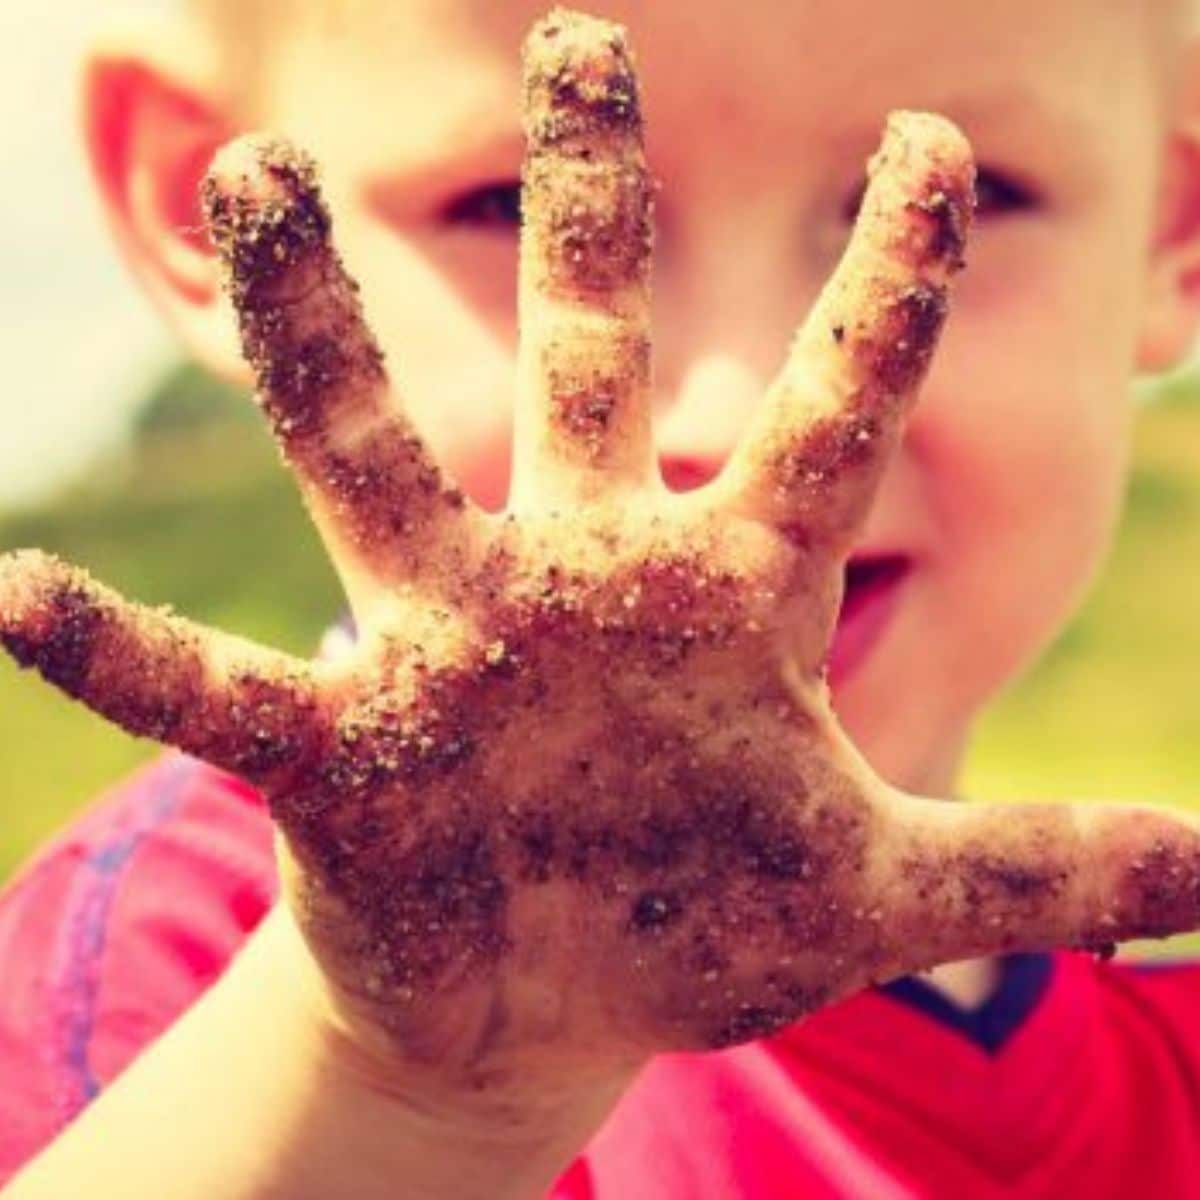 Young boy showing his dirty hand.